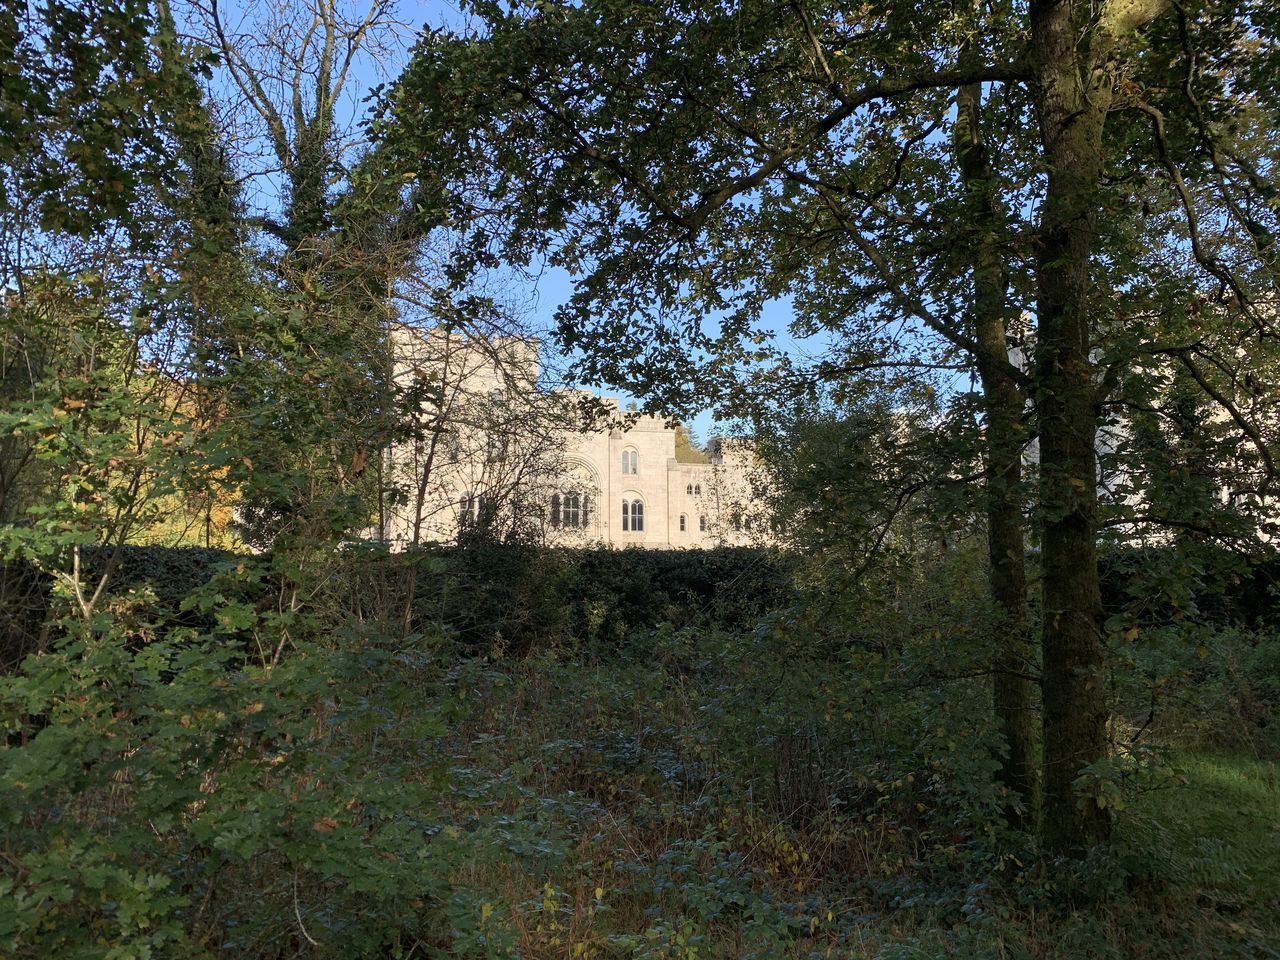 LOW ANGLE VIEW OF OLD BUILDING AGAINST TREES IN FOREST